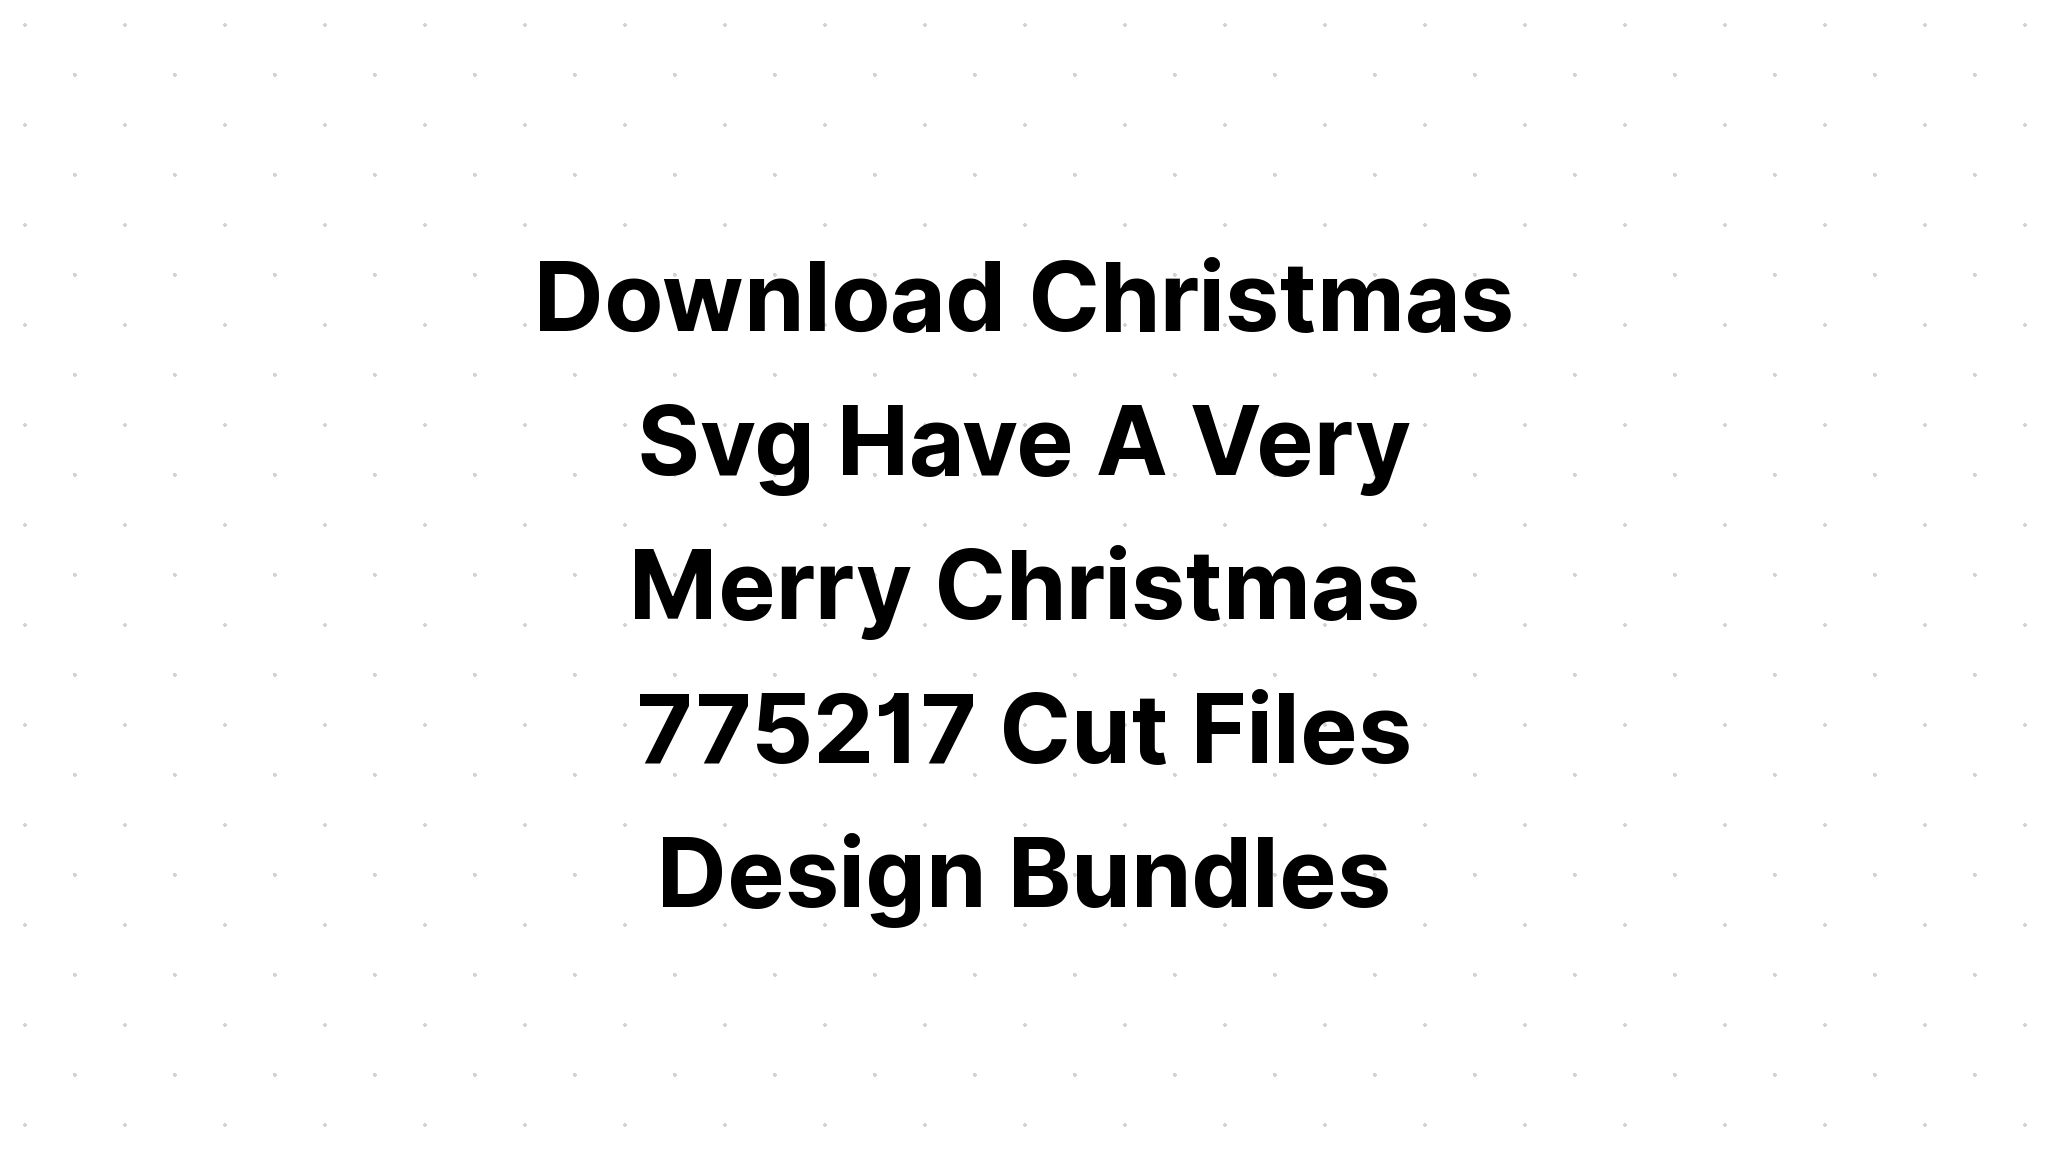 Download Christmas Pandemic Style SVG File